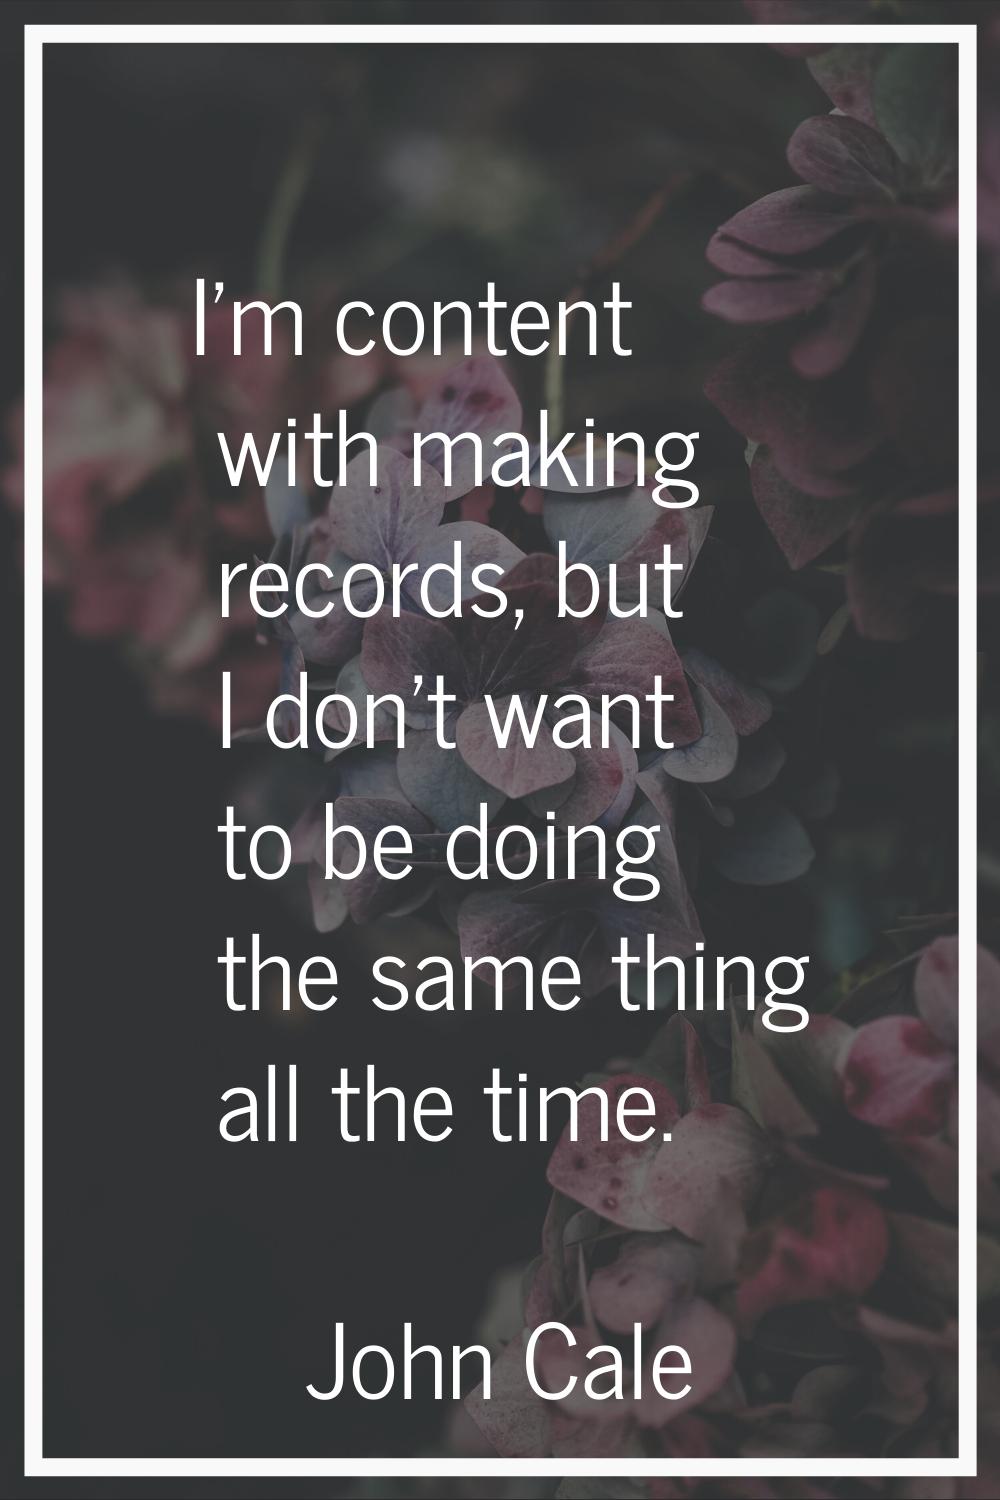 I'm content with making records, but I don't want to be doing the same thing all the time.